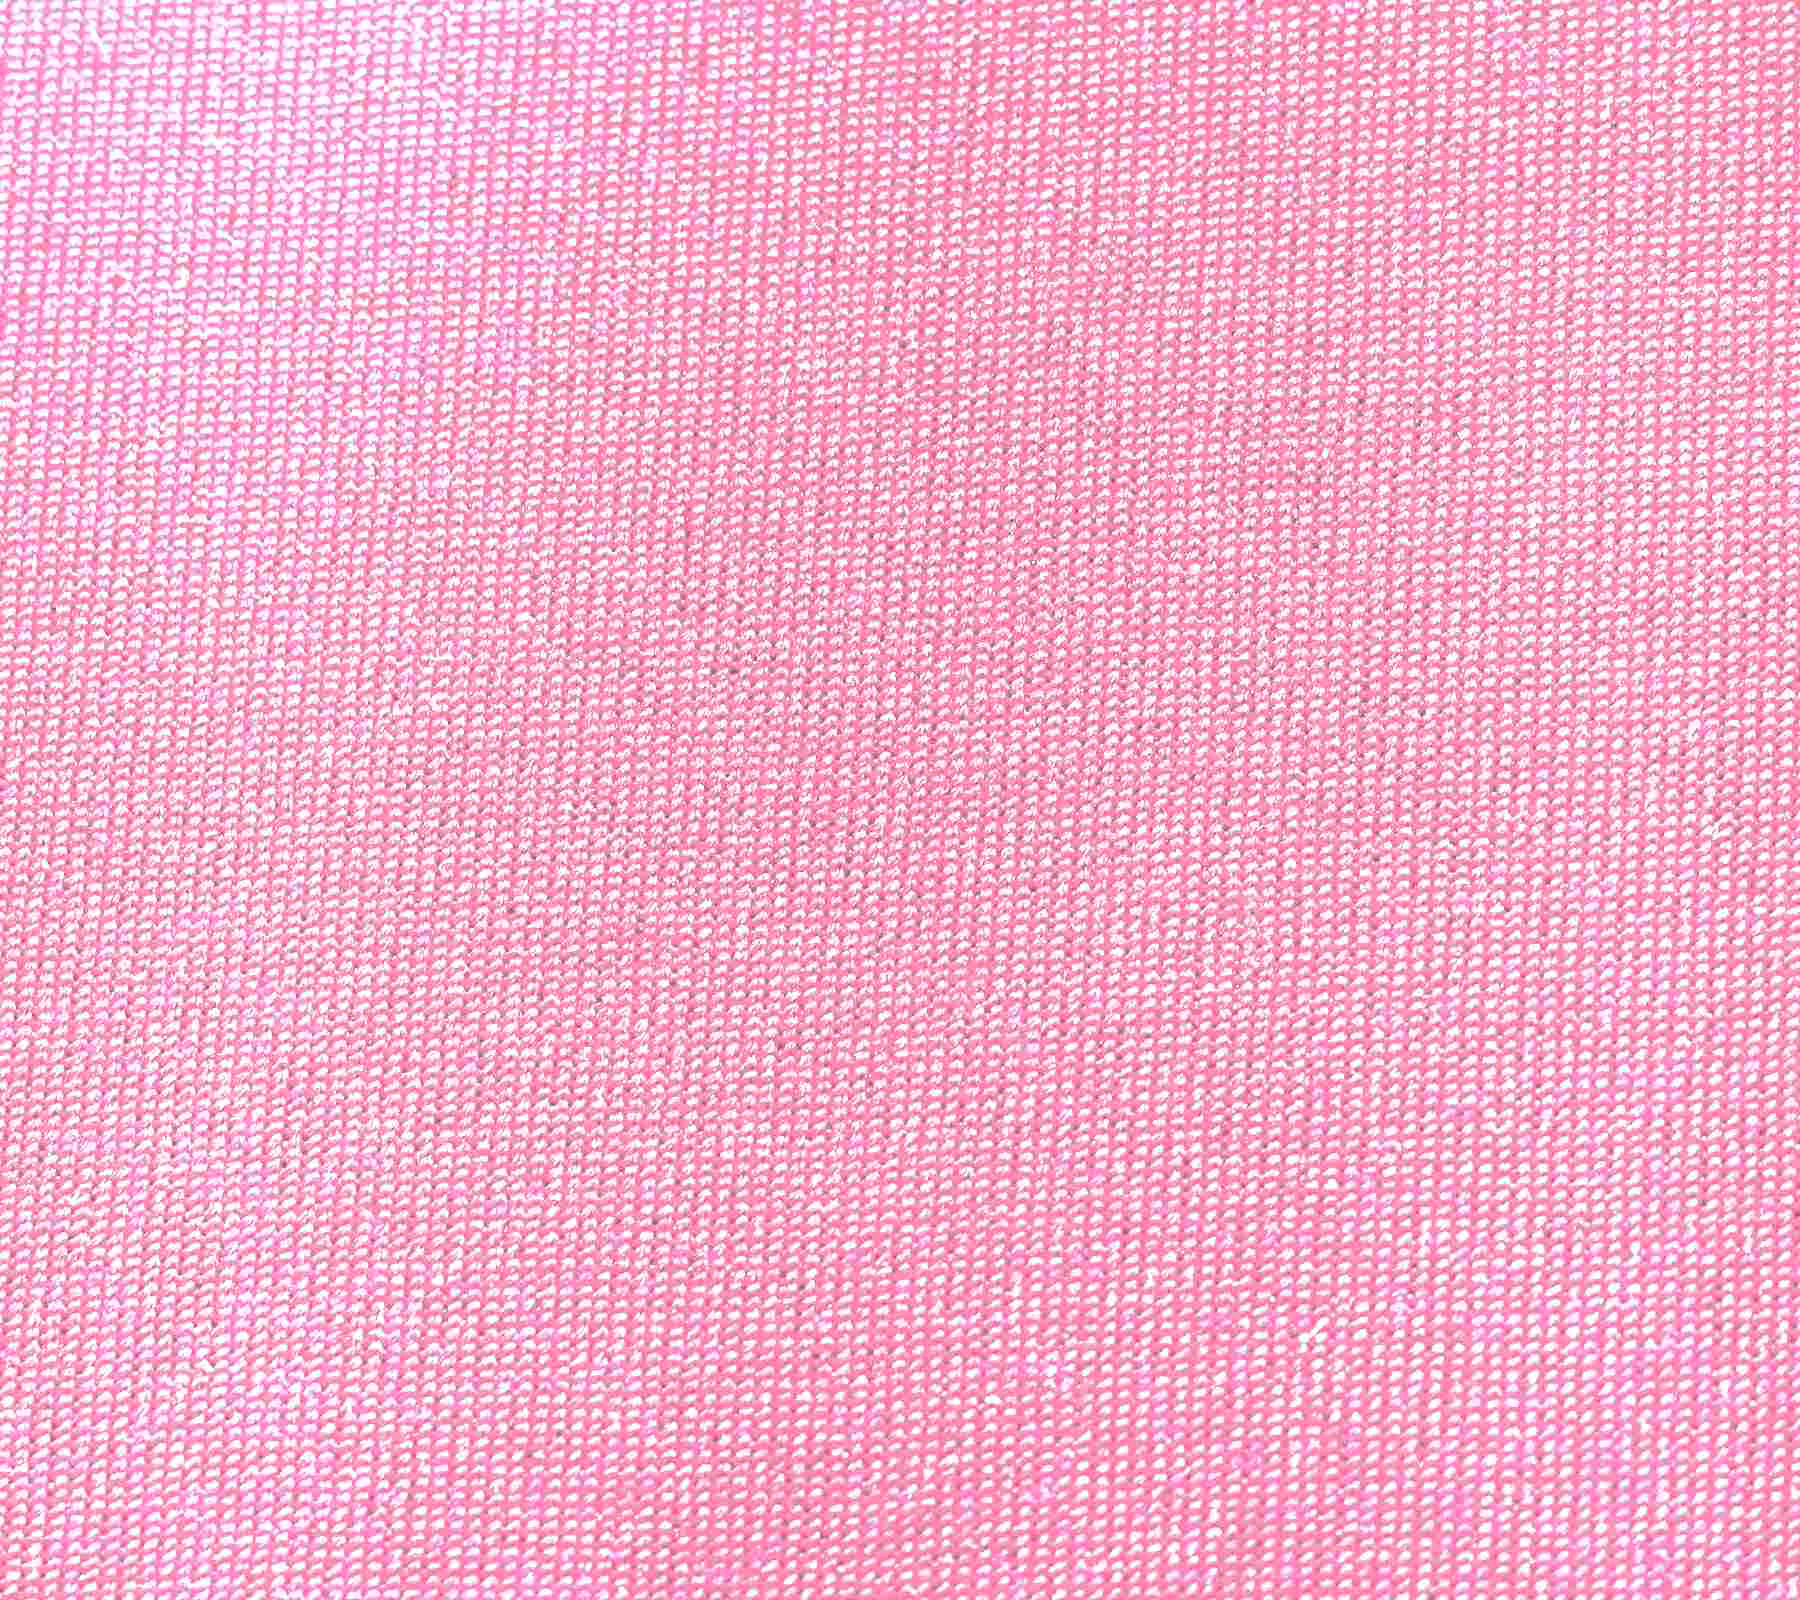 Pink Woven Nylon Fabric Background Background Wallpaper